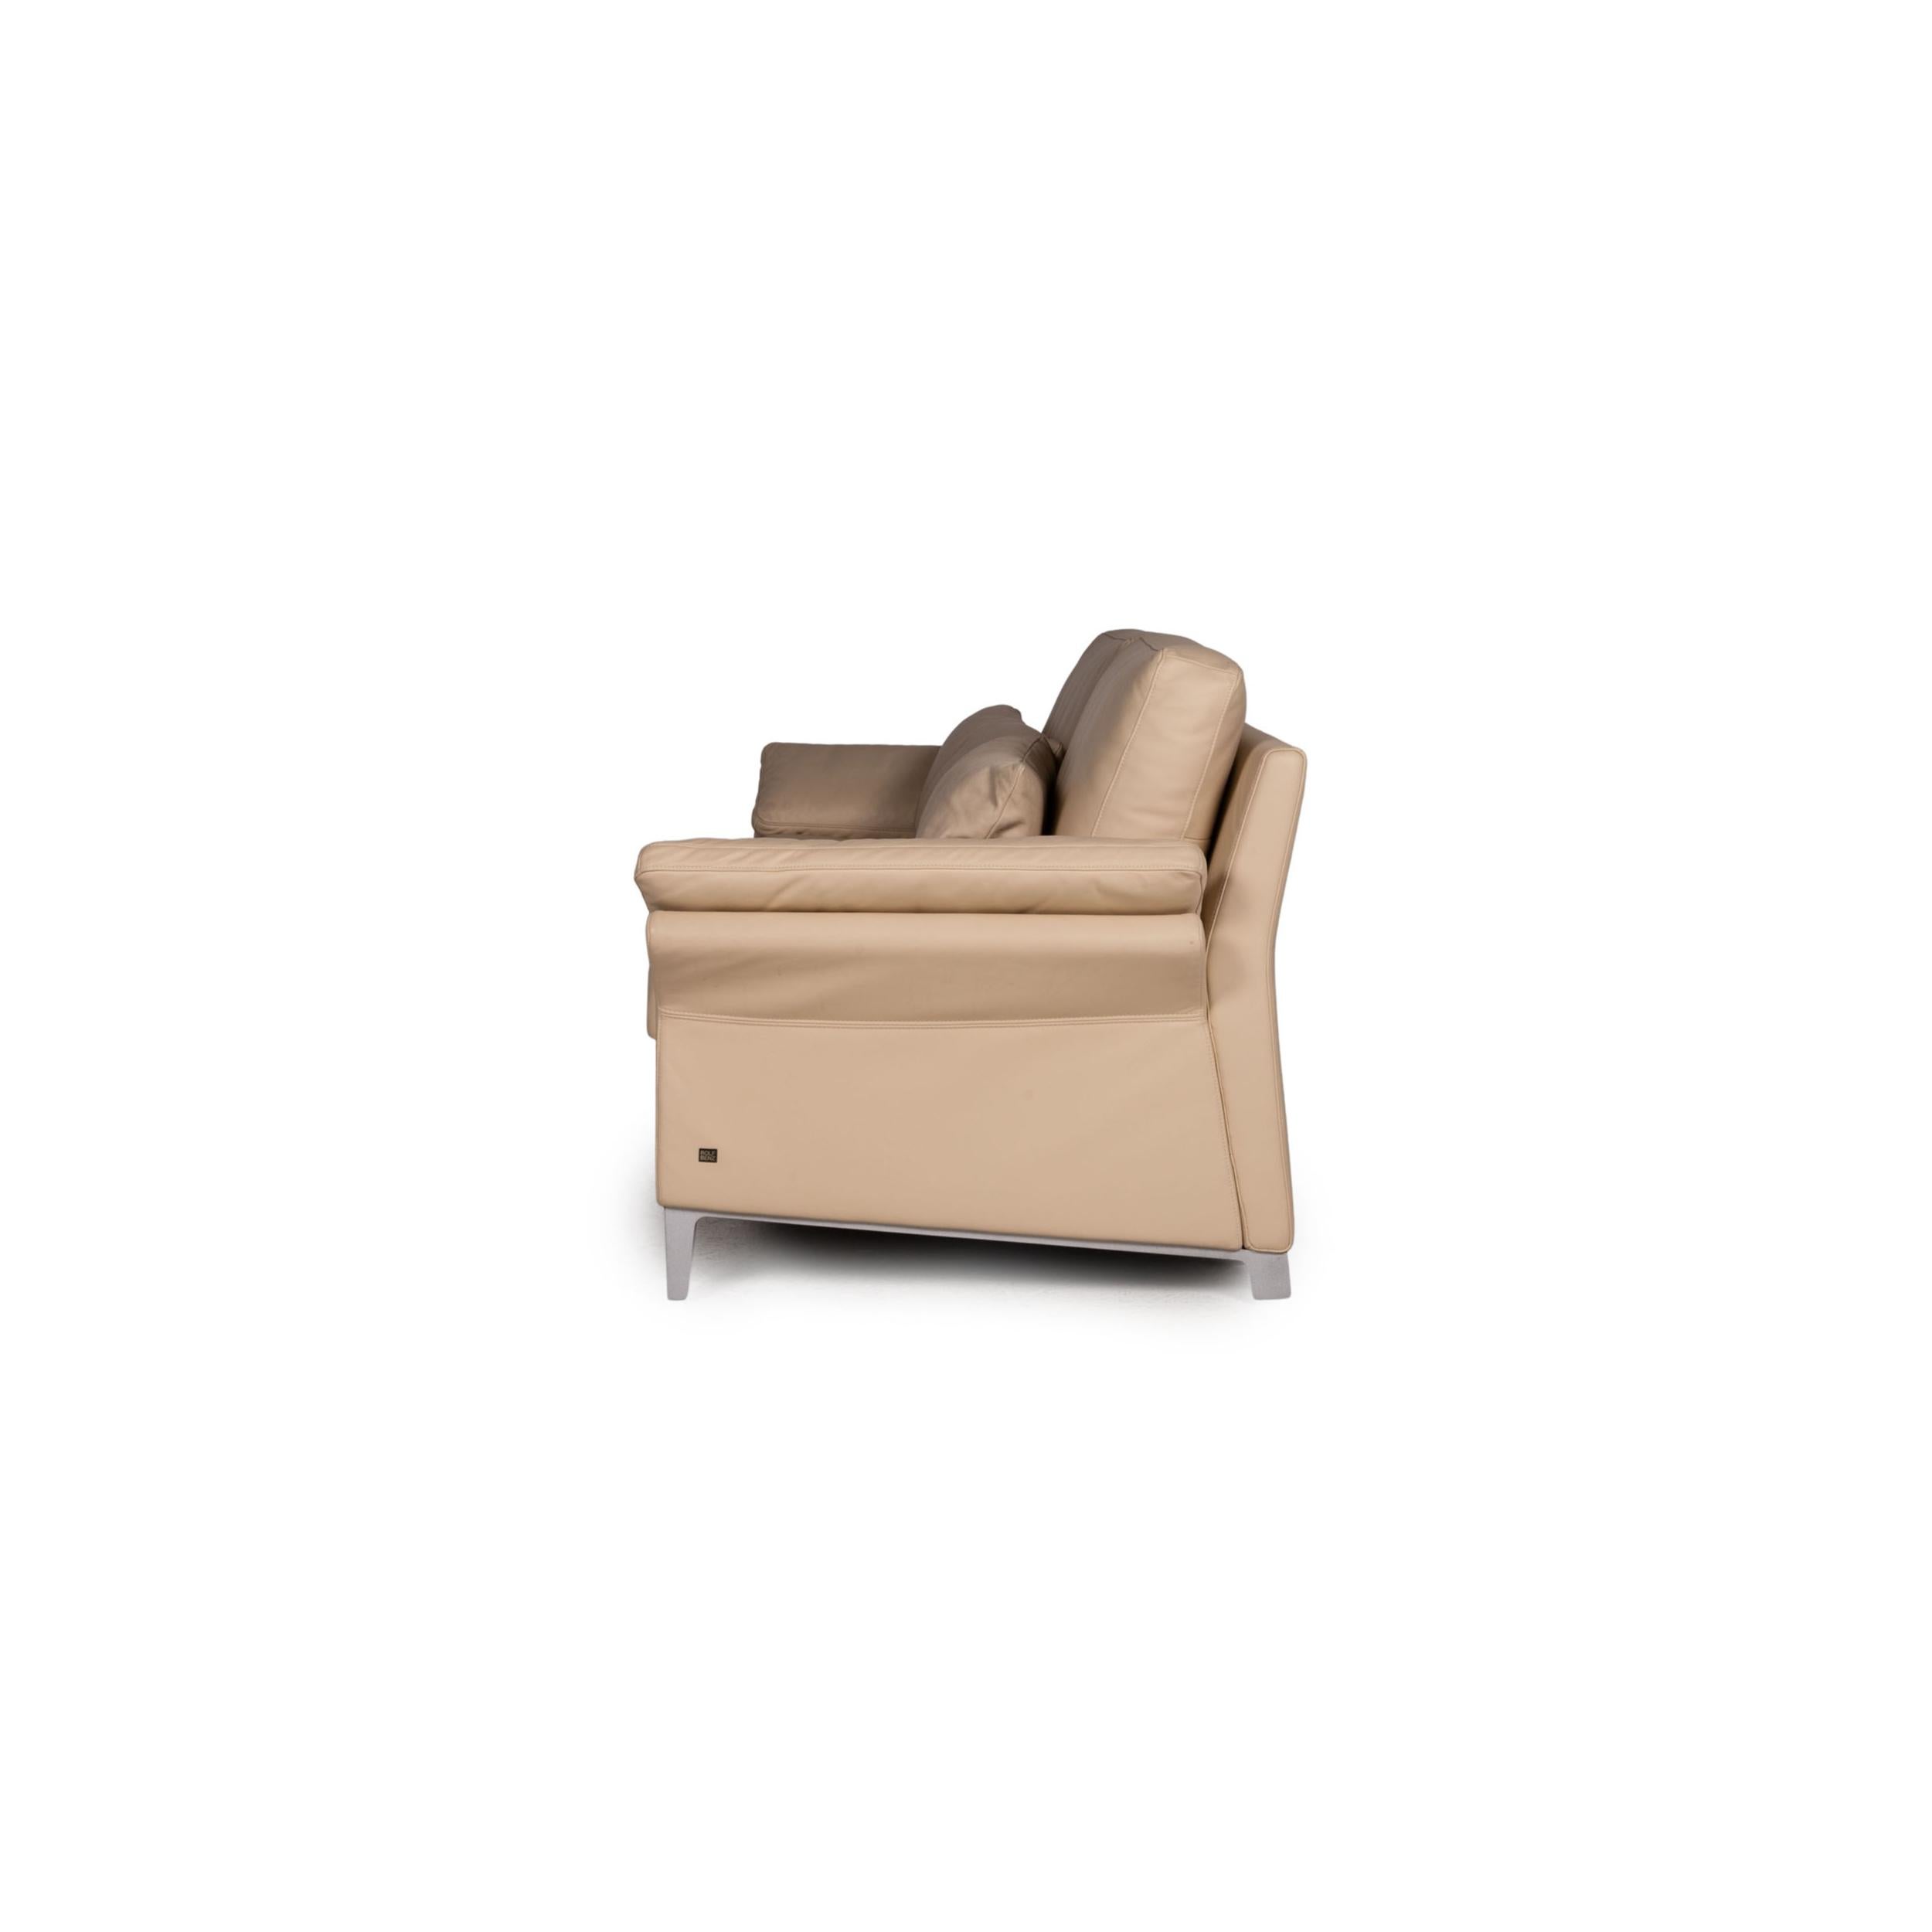 Rolf Benz 3300 Leather Sofa Cream Three-Seater Couch For Sale 1